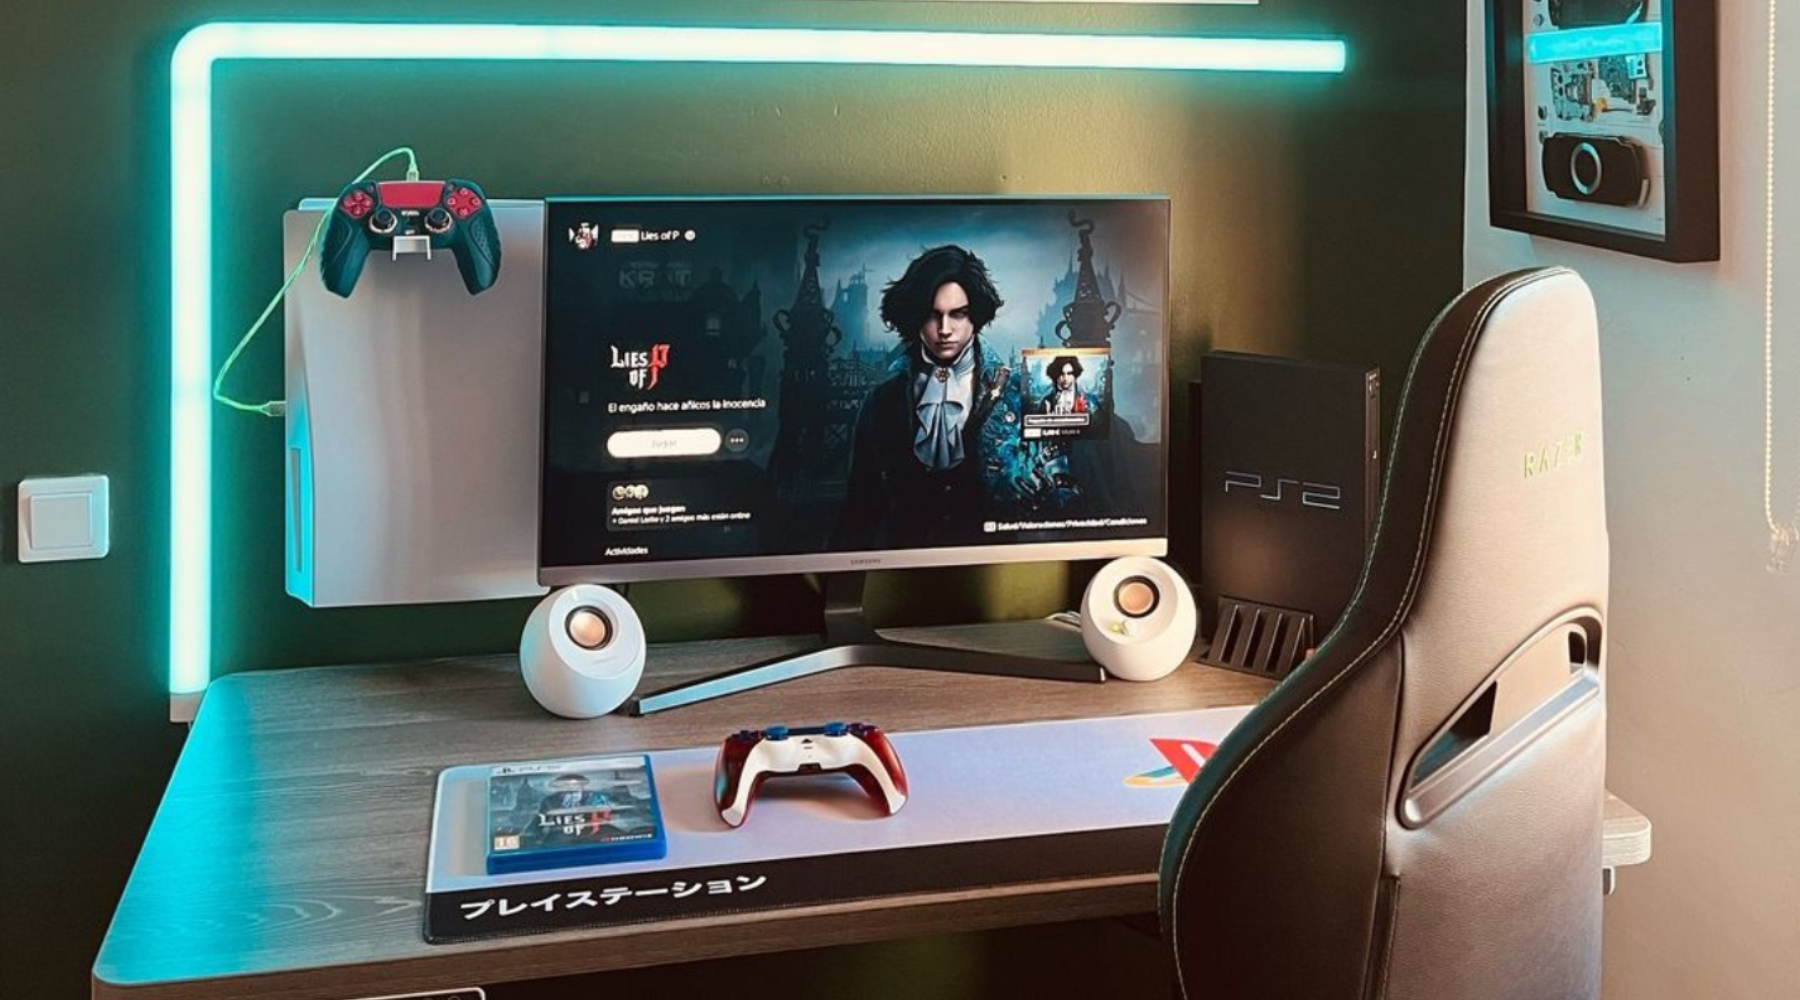 Making the Most of Small Spaces: Wall Mounts for Compact Gaming Setups